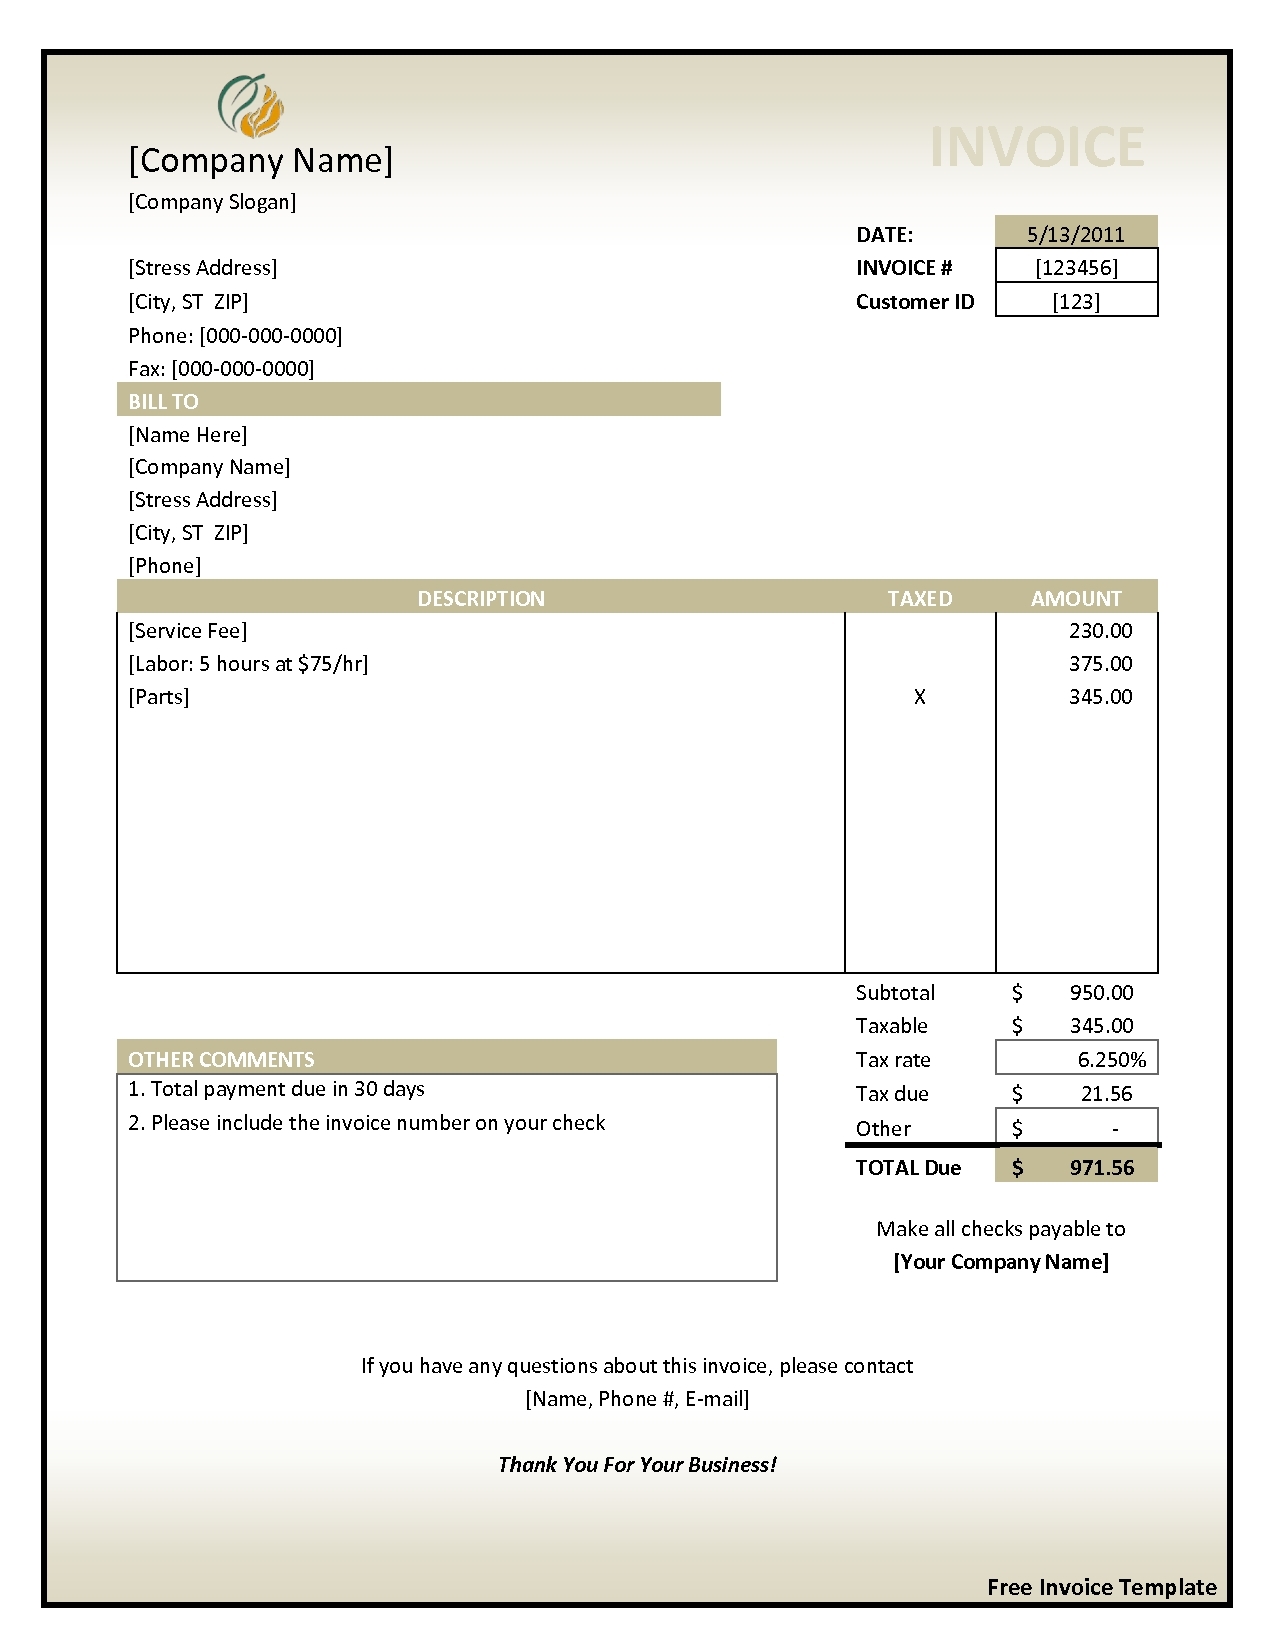 download sample invoice invoice template free 2016 invoice download free